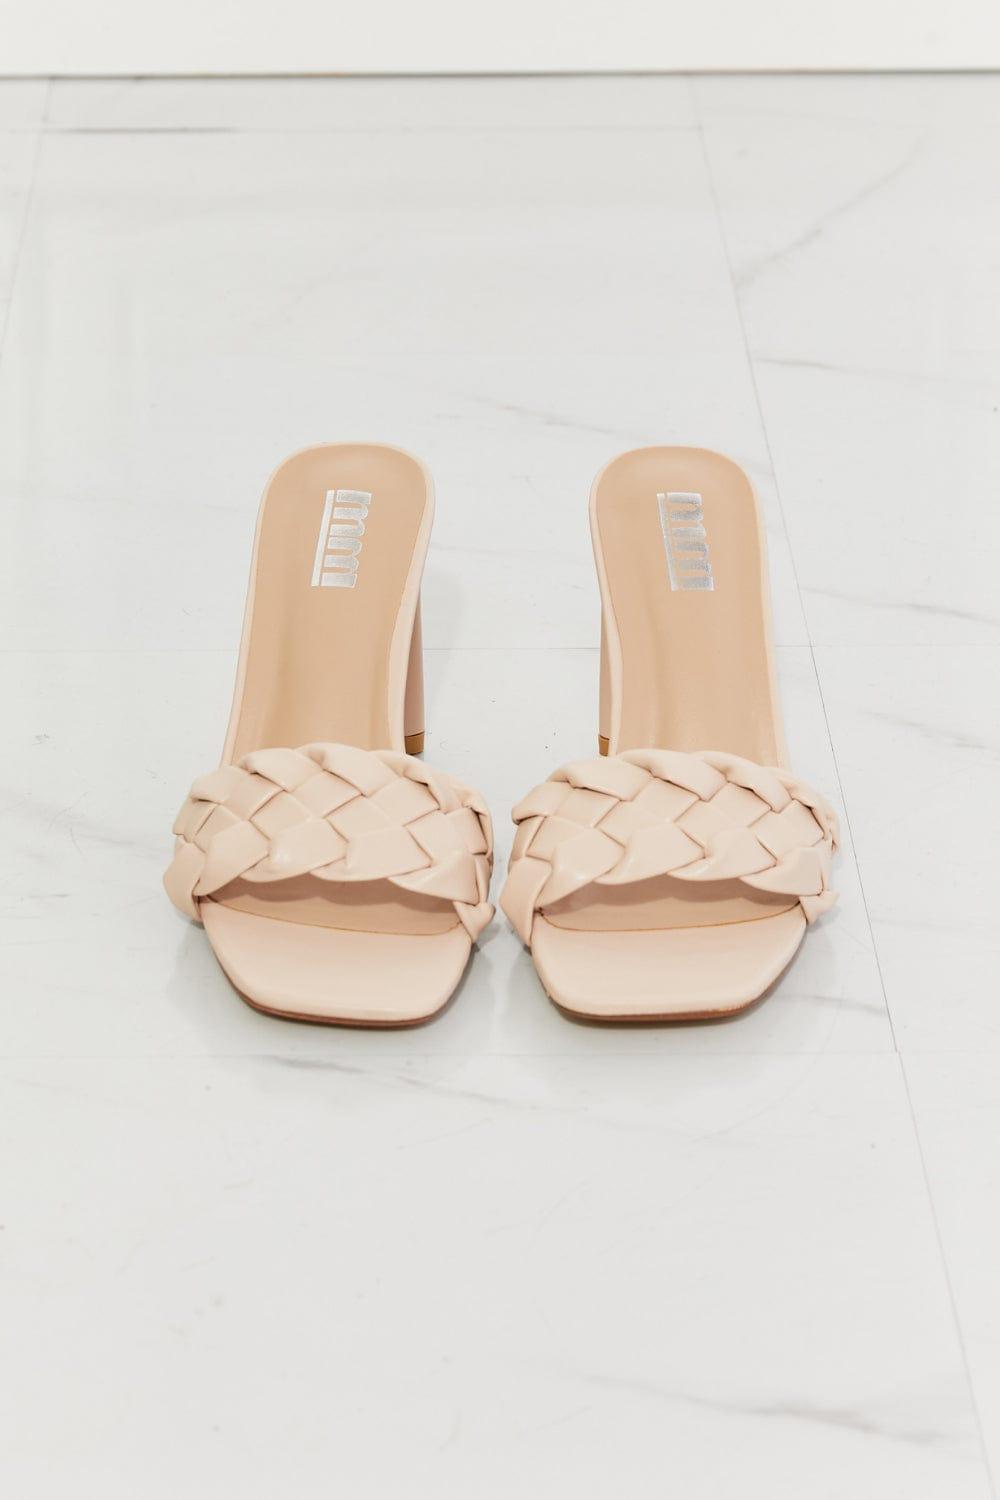 Trendsi shoes MMShoes Top of the World Braided Block Heel Sandals in Beige